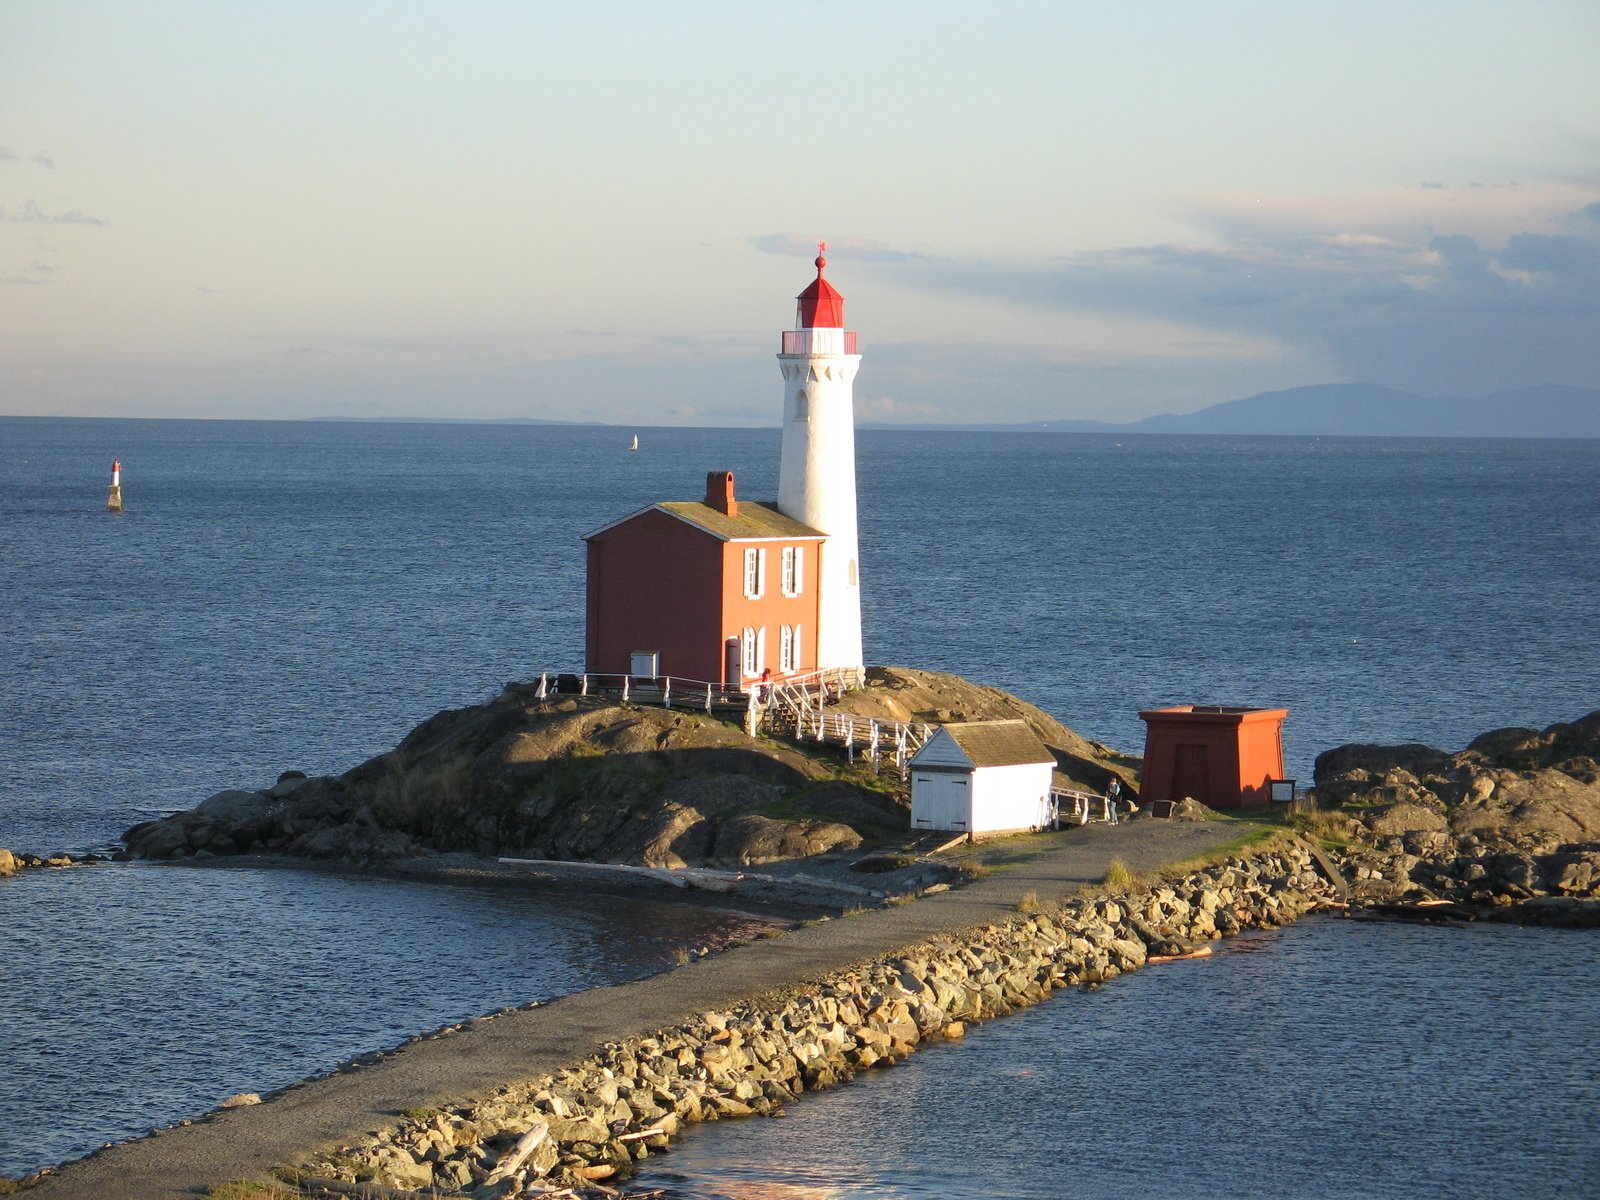 a lighthouse stands on an island with a body of water and sailboats